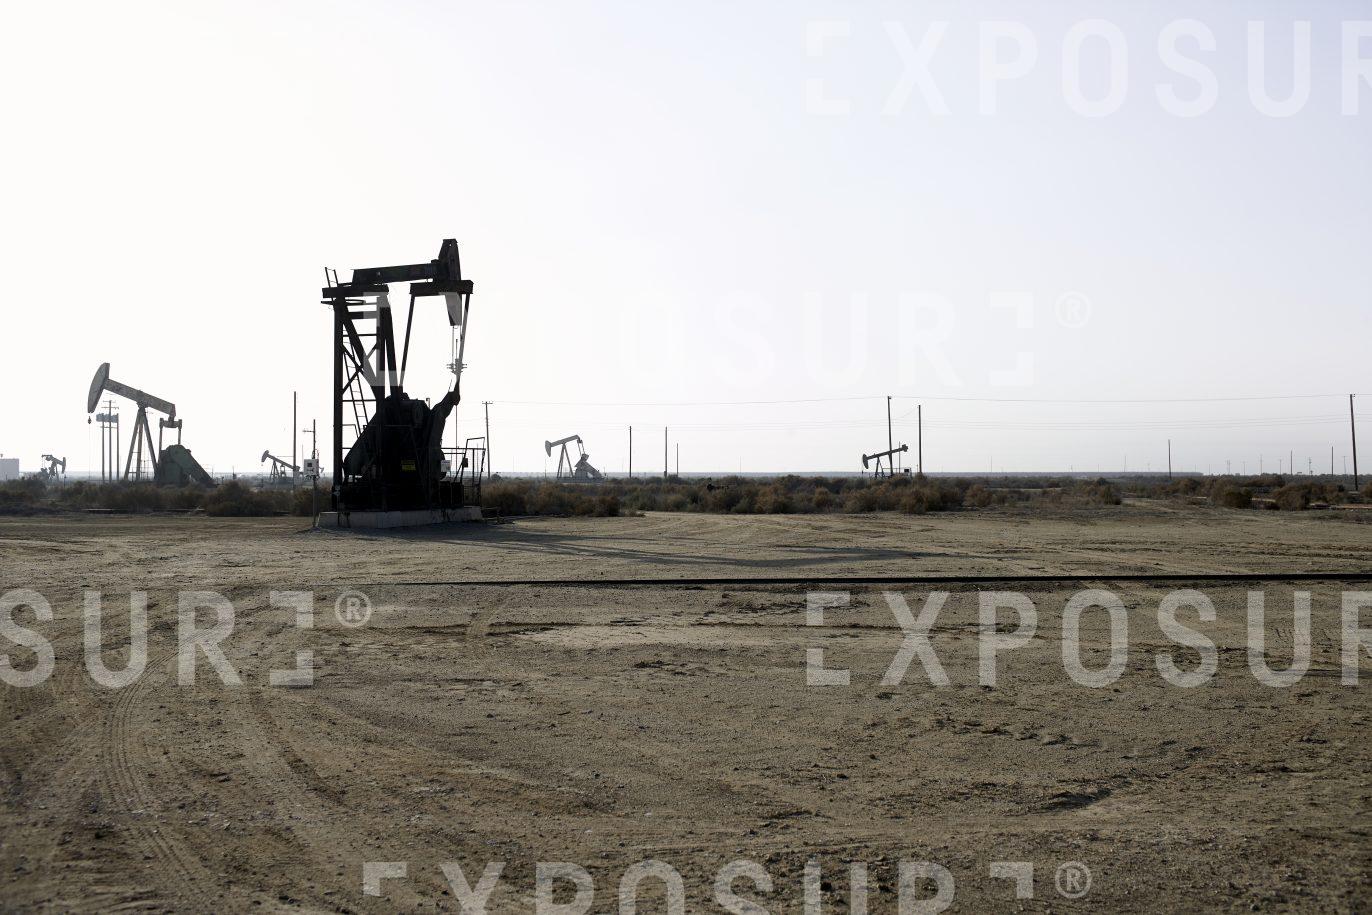 California oil extraction